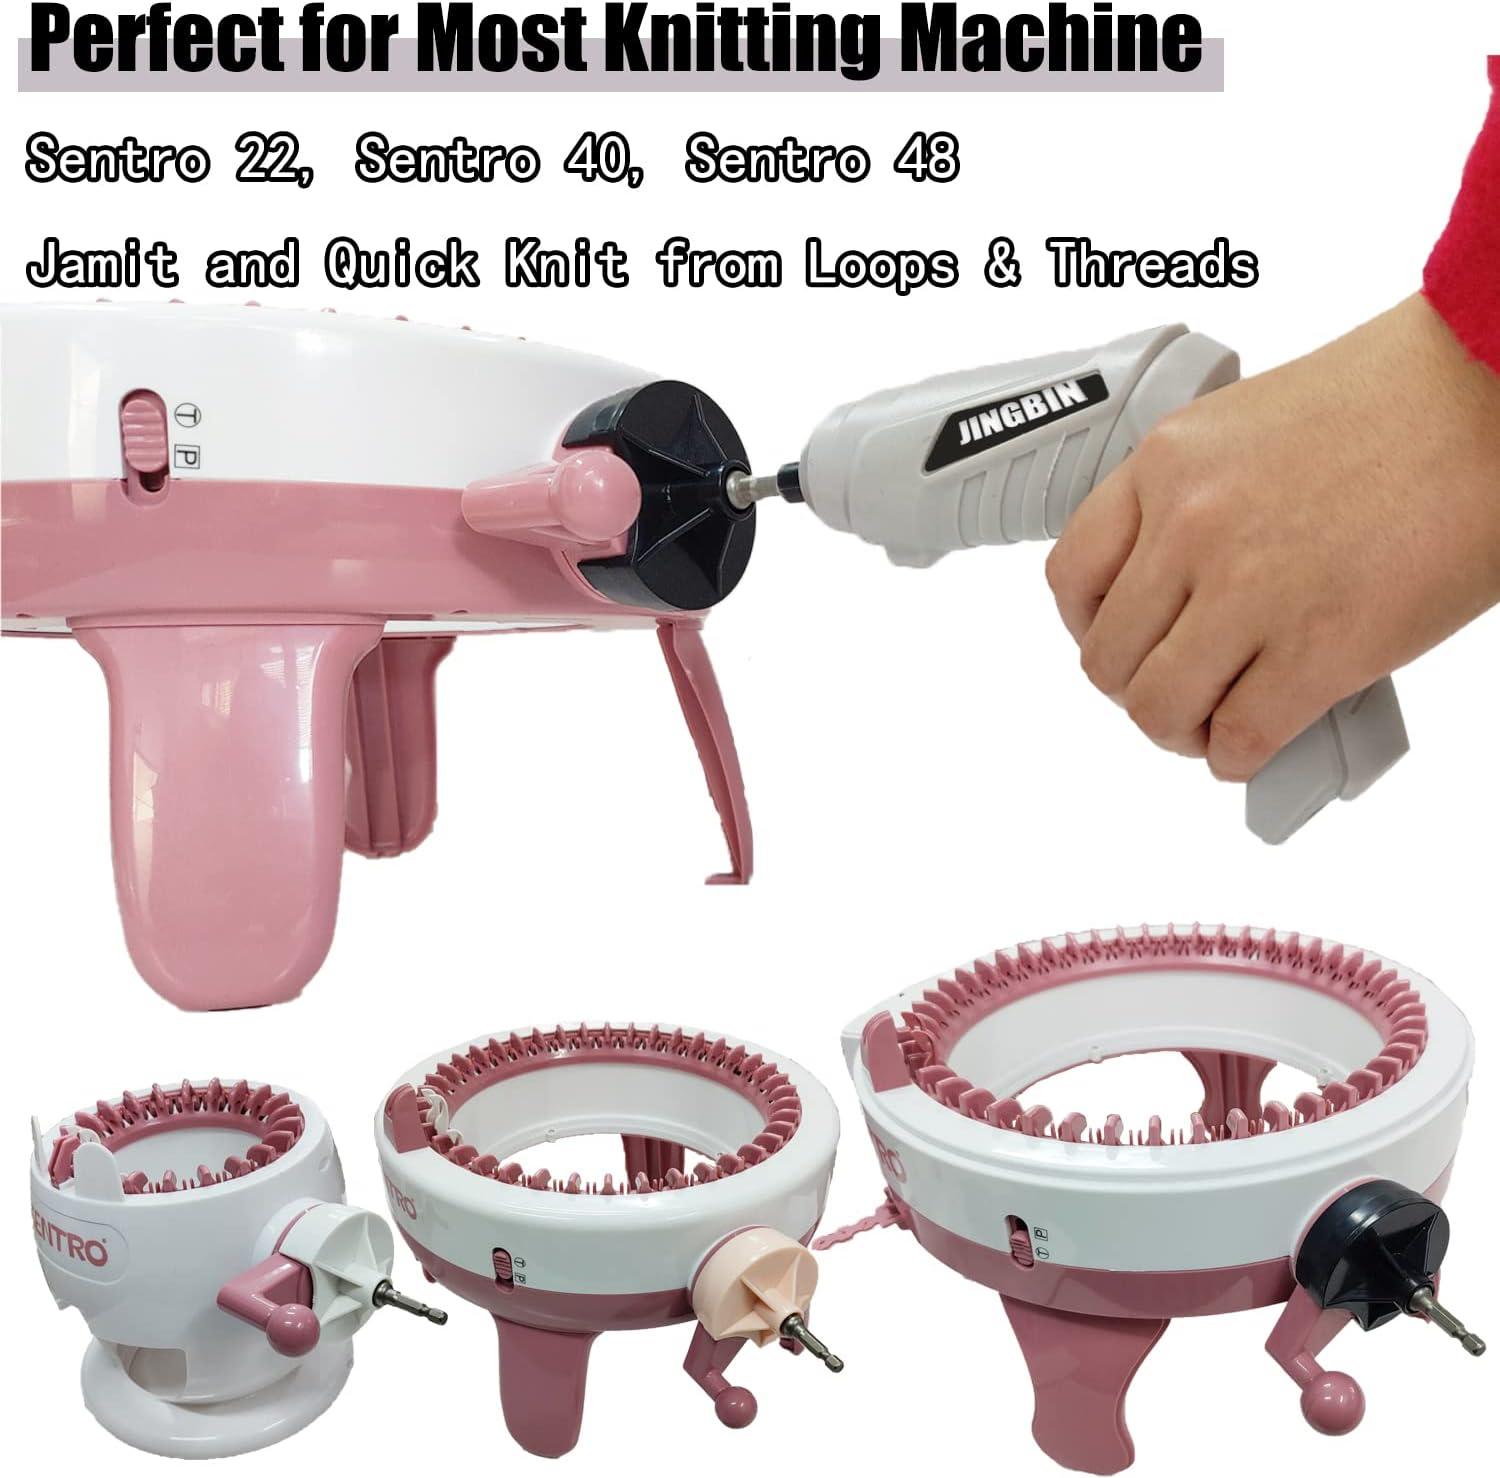 Review & How to Use SENTRO Knitting Machine - 22, 32, 40, 48